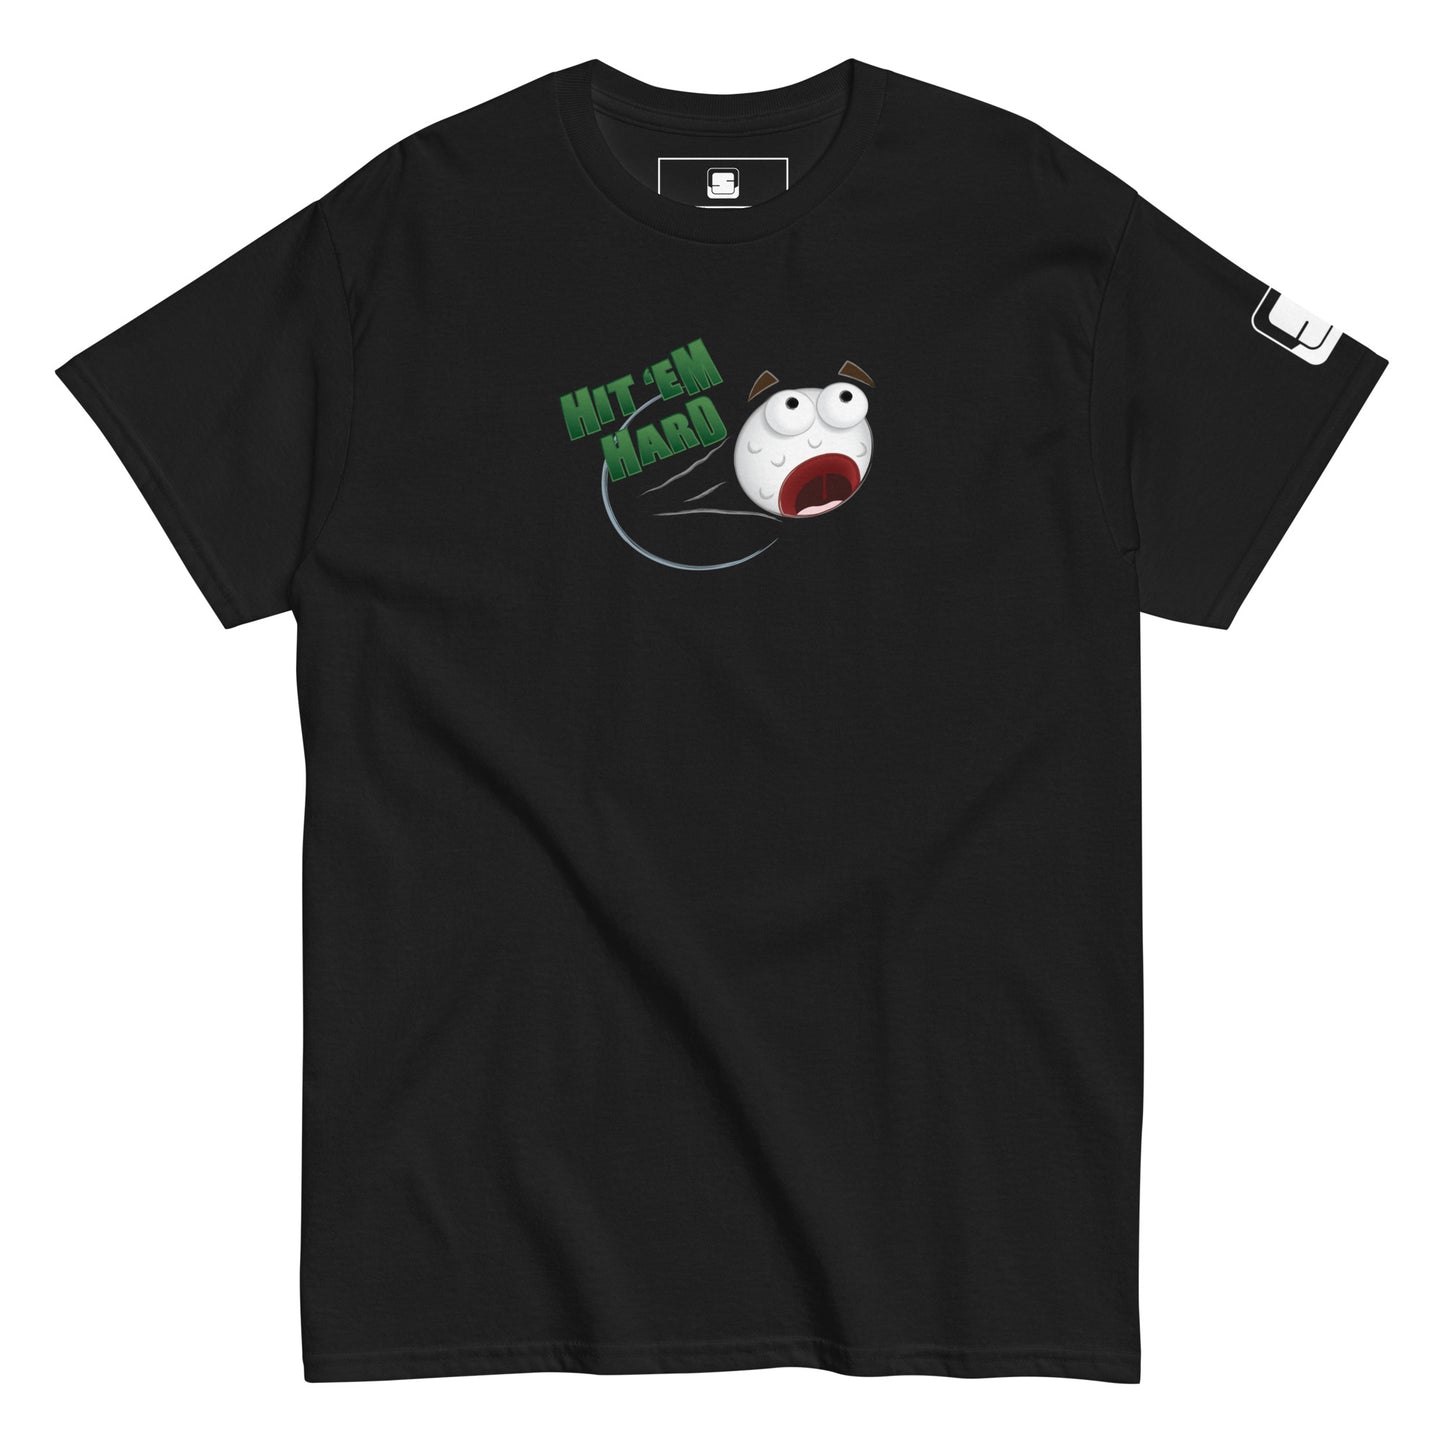  A black t-shirt is laid flat, featuring a colorful graphic in the center. The graphic depicts a distressed cartoon golf ball with wide eyes and an open mouth, flying through the air. Above the golf ball, the phrase "HIT 'EM HARD" is printed in bold, green letters. The golf ball leaves a streak behind it, emphasizing its high speed. The right sleeve has a small white logo patch. The bold graphic stands out against the black background, creating a fun and energetic design.